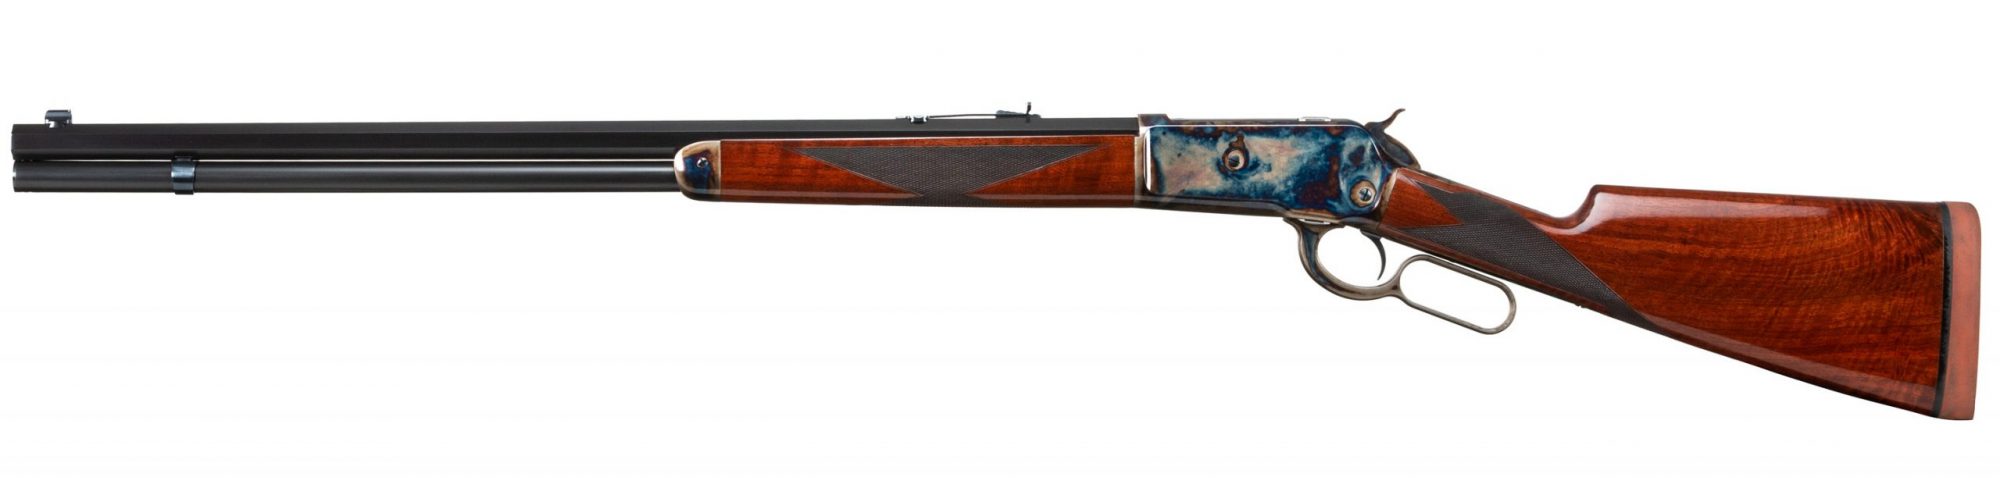 Photo of a Turnbull Model 1886 rifle chambered in .45-70 Govt., and featuring all period-correct finishes including color case hardening